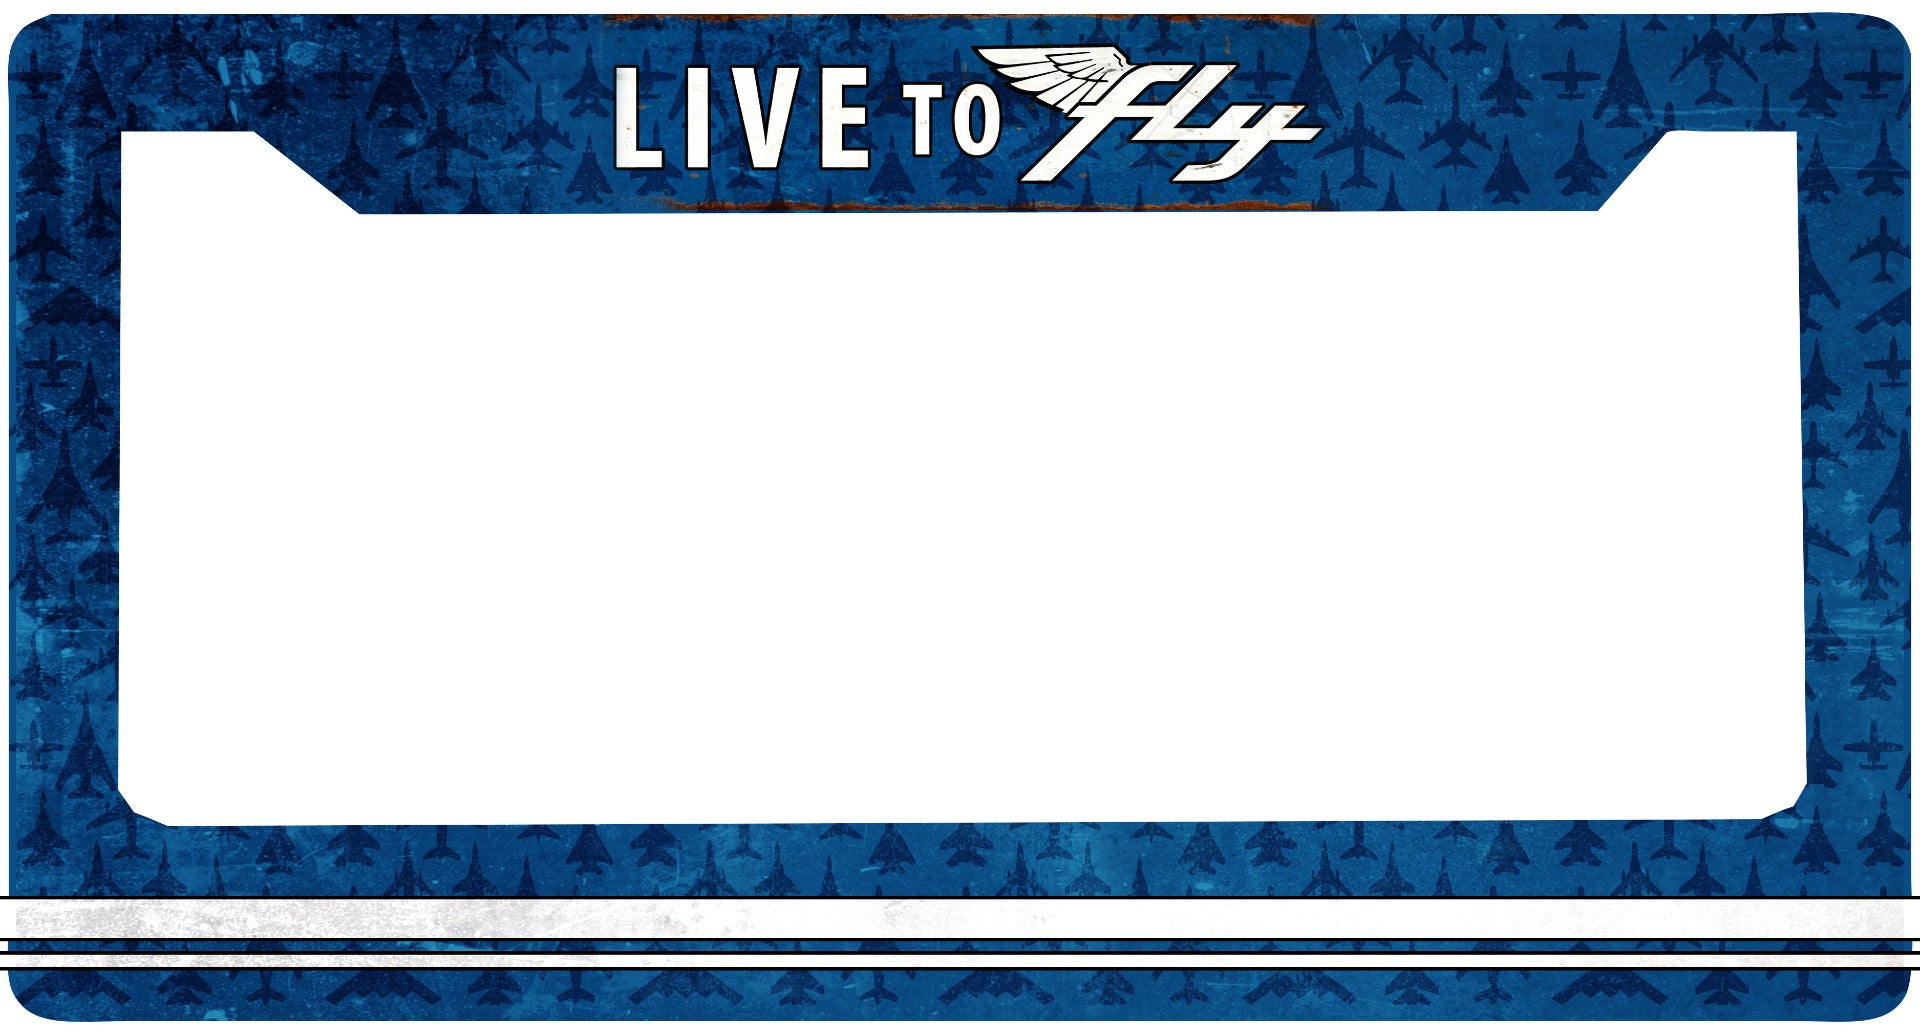 Live To Fly  License Plate Frame Vintage Sign - Personalized